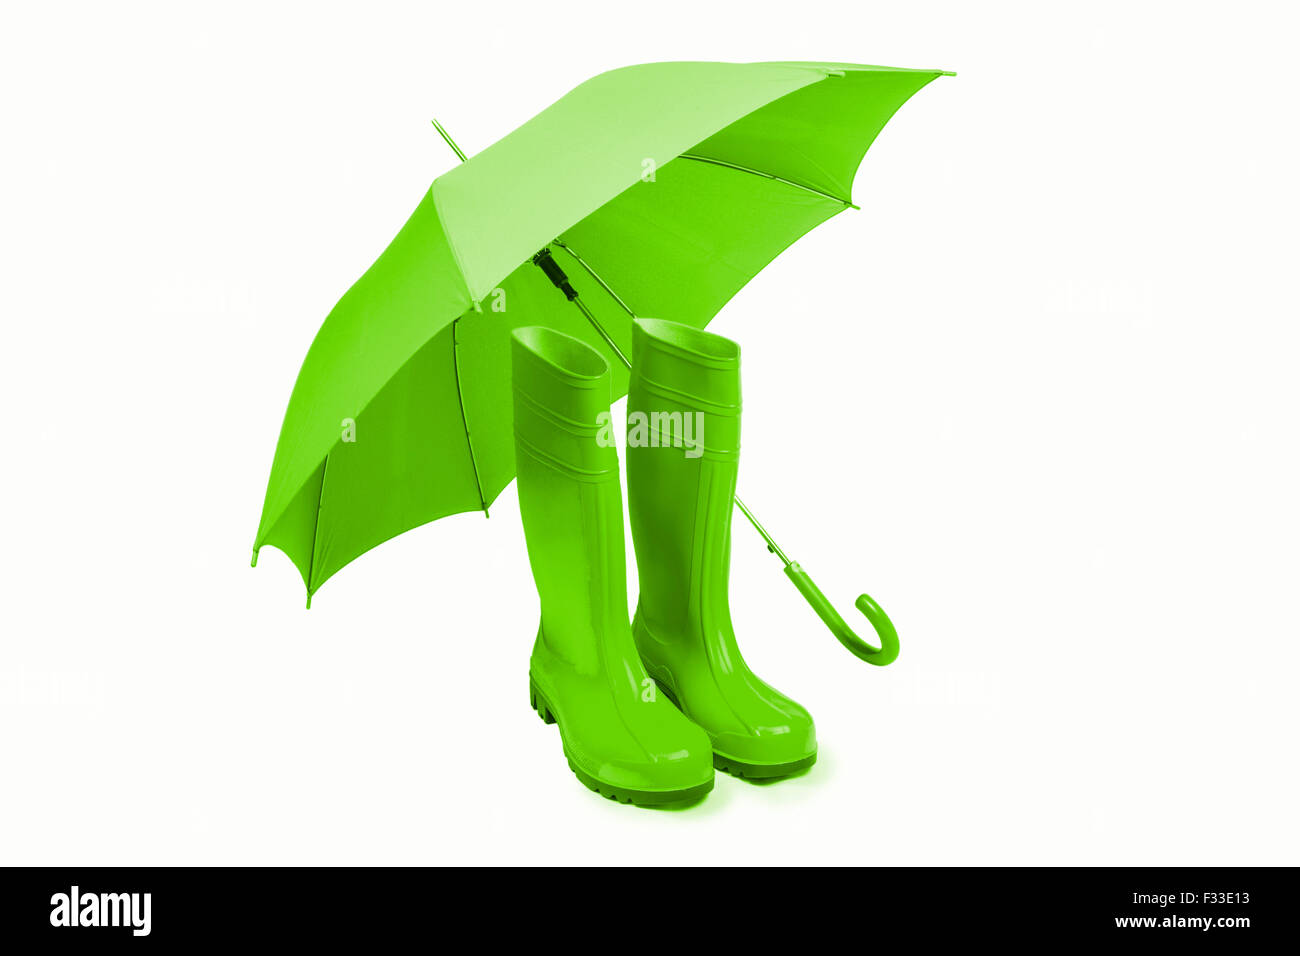 Rubber boots and umbreall isolated in green Stock Photo